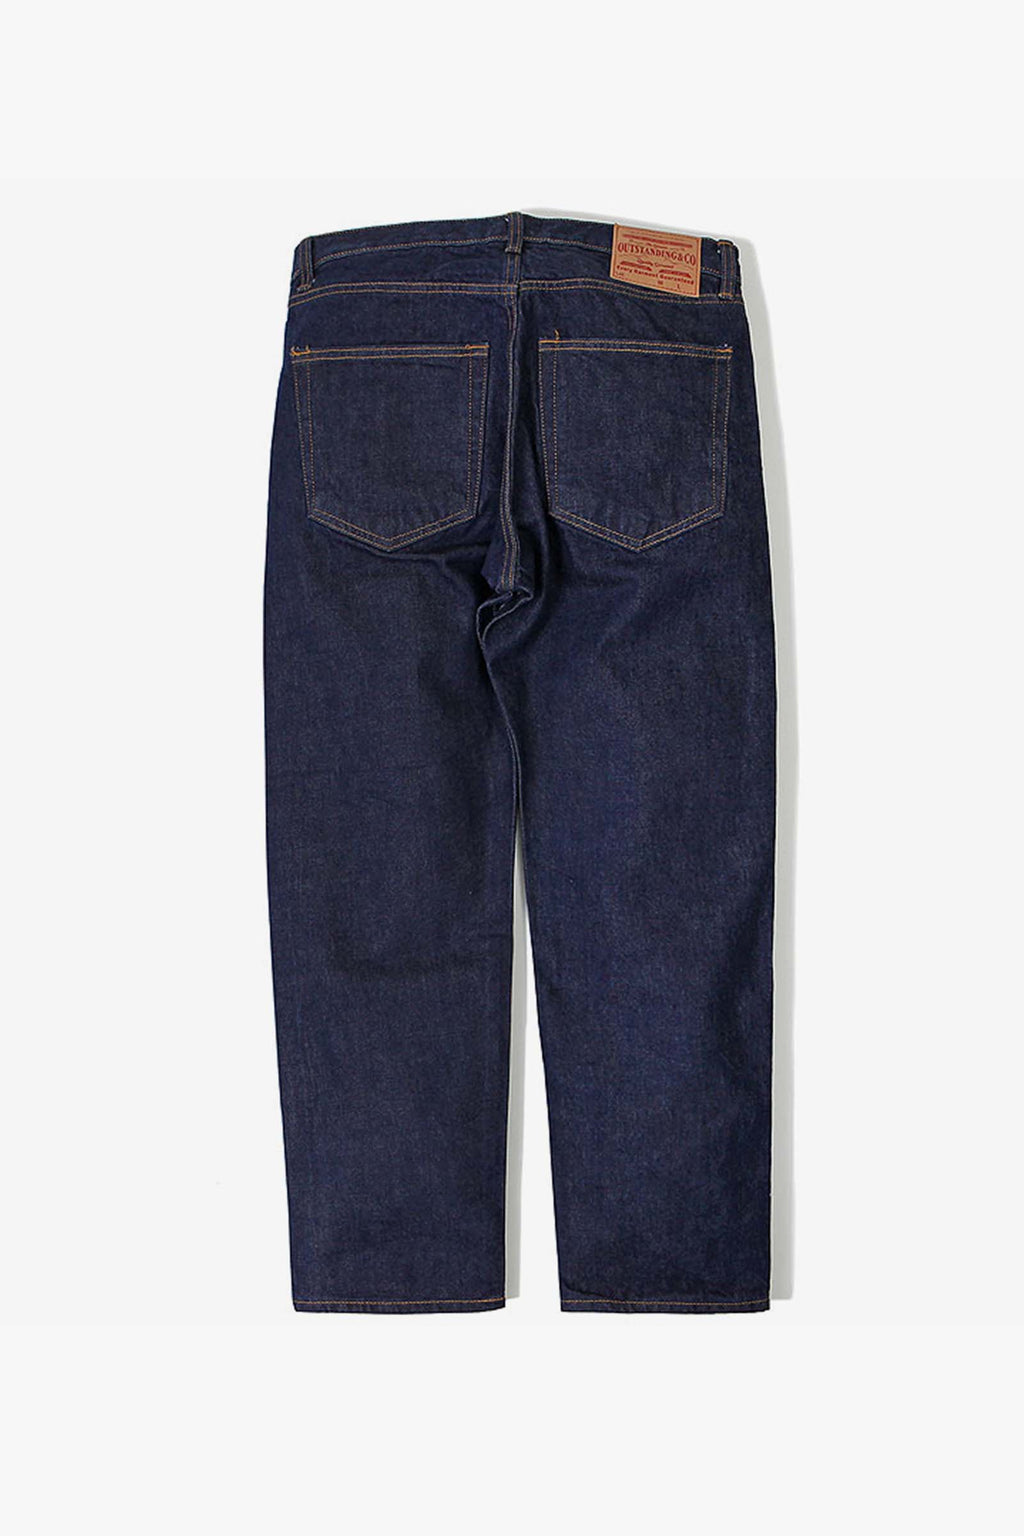 Outstanding & Co. - Tapered Washed Jeans - Indigo